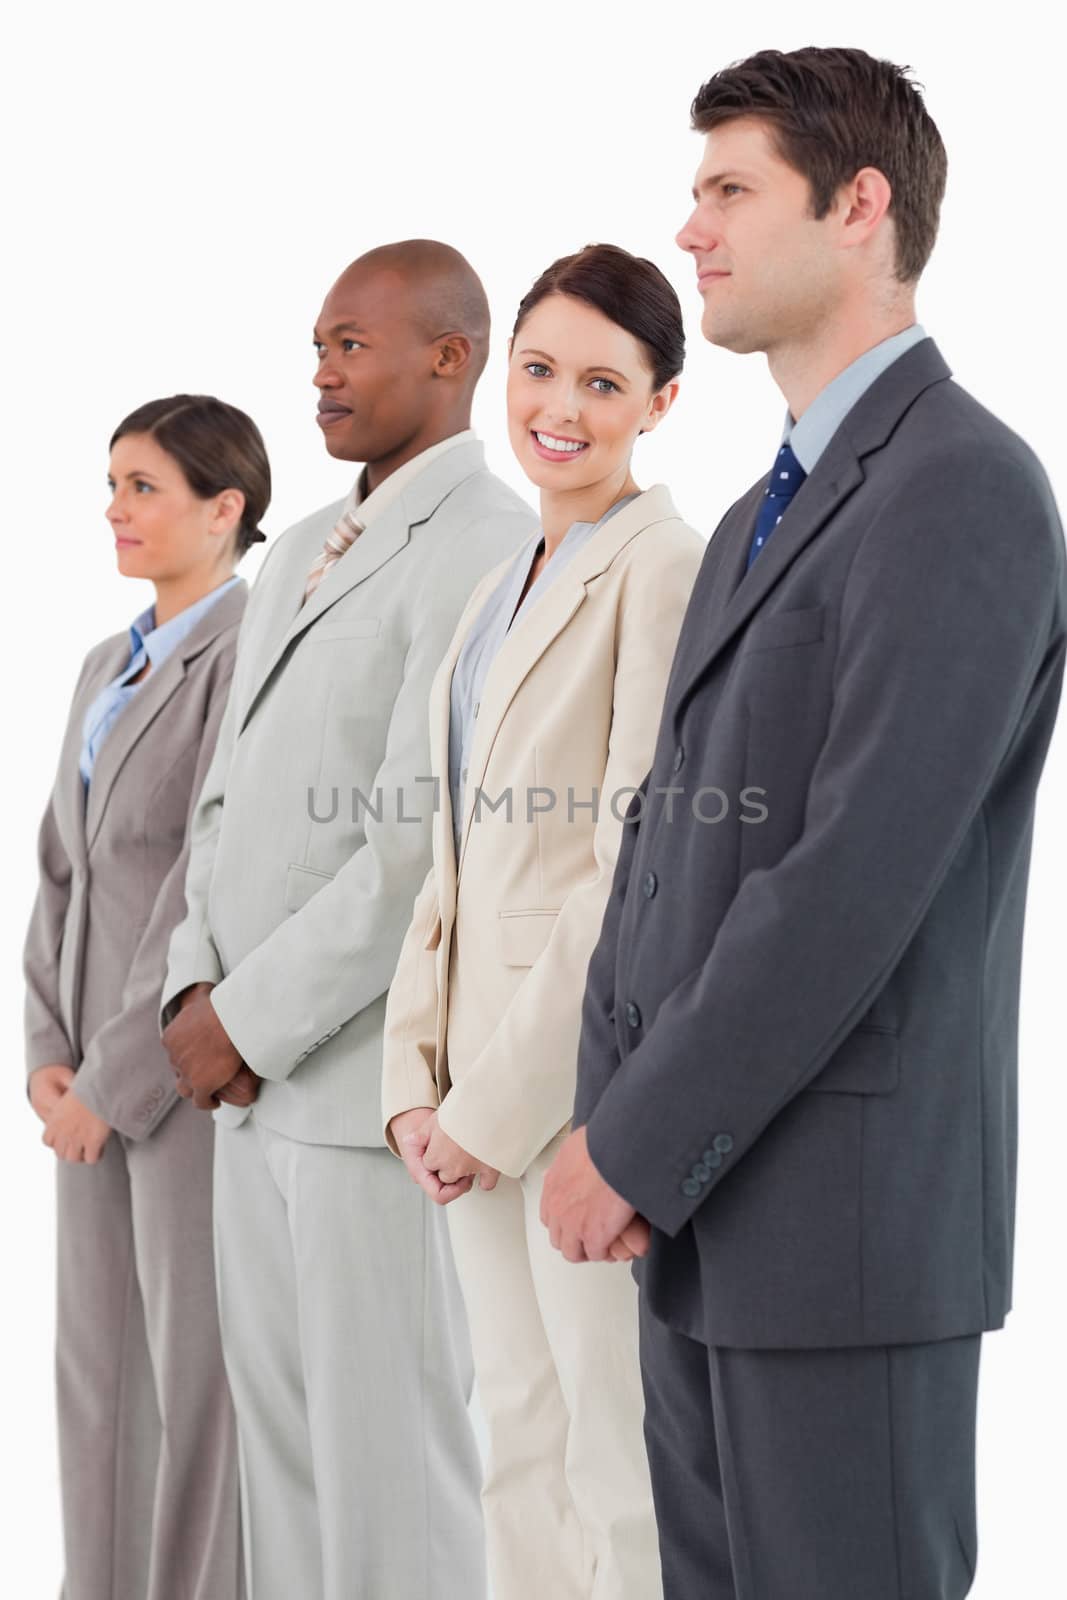 Smiling saleswoman standing between her colleagues against a white background